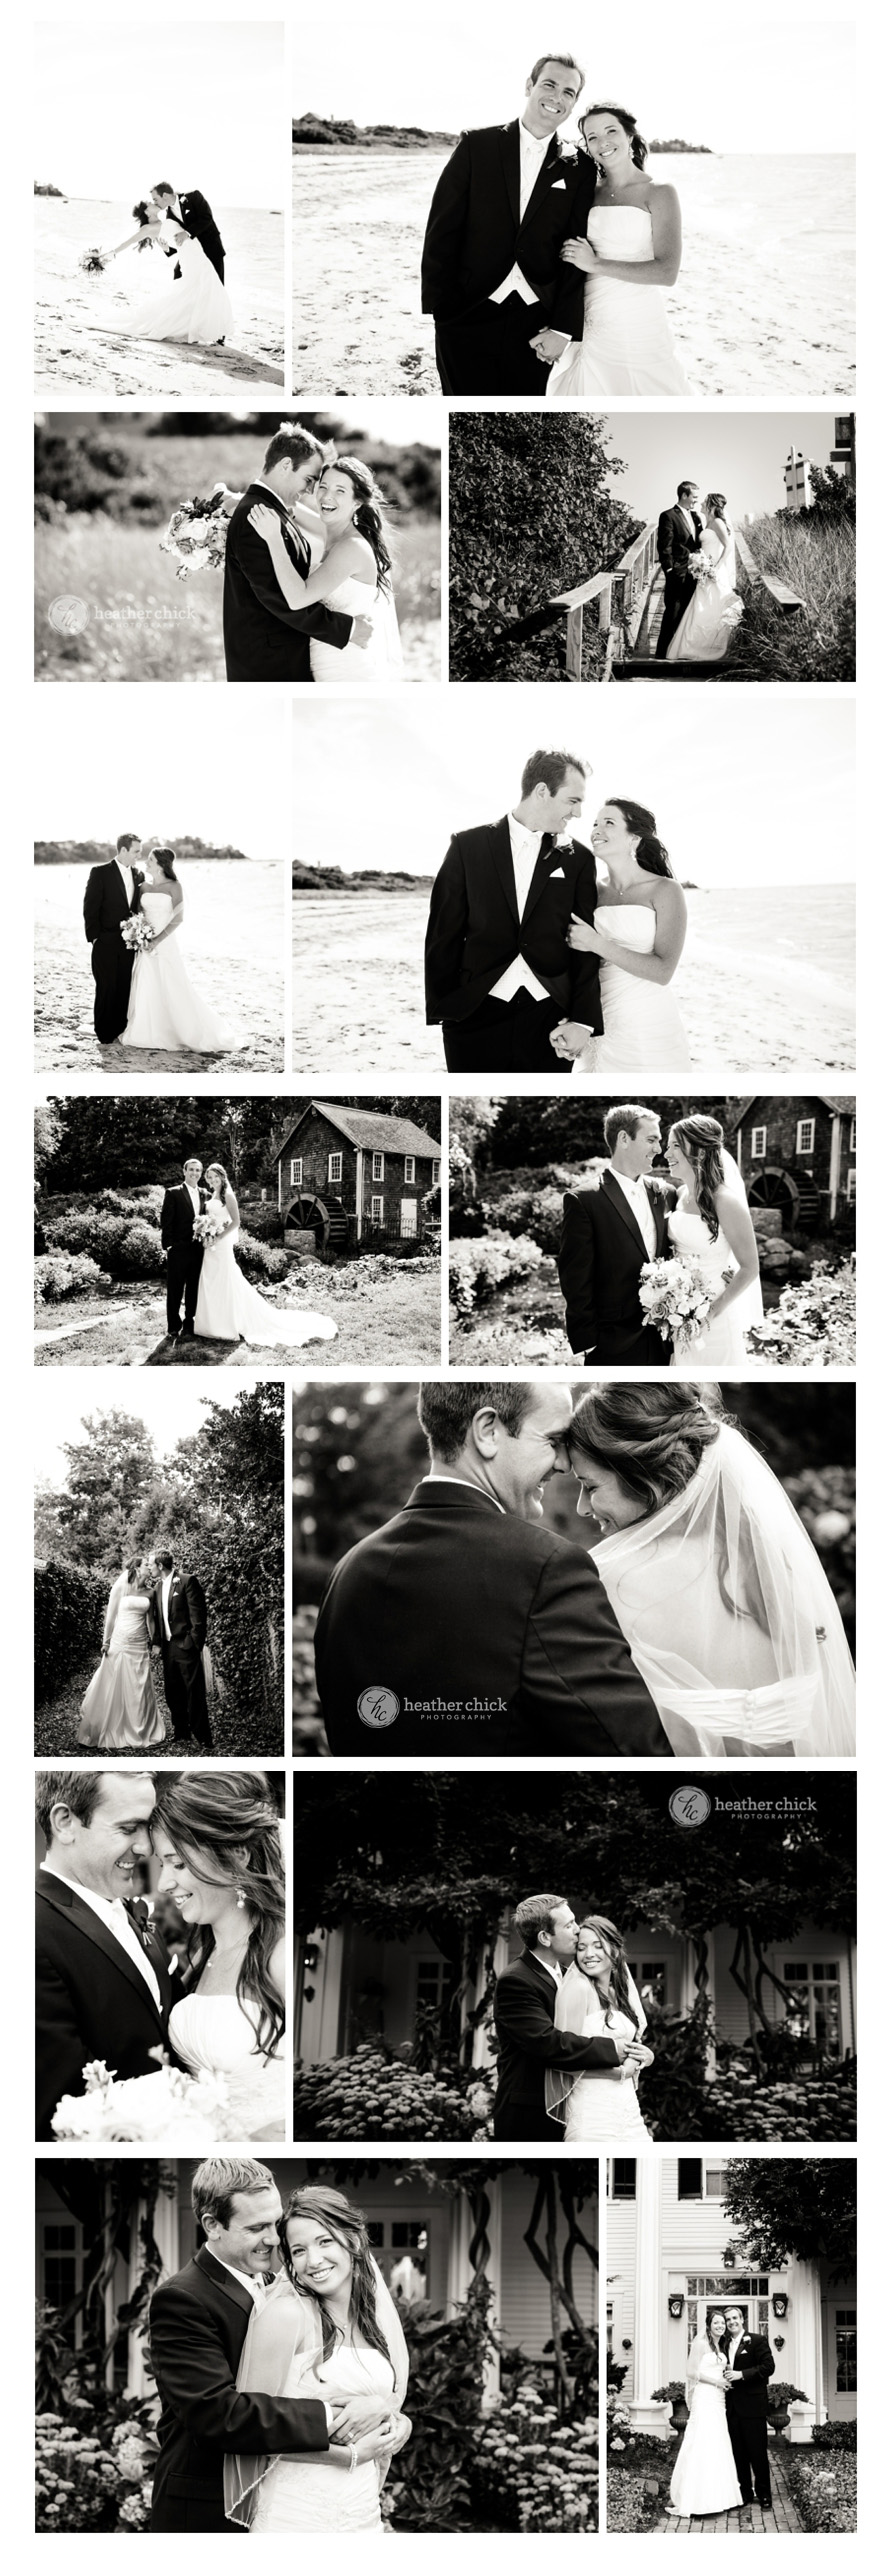 captain-linnell-house-cape-cod-wedding-photographer-heather-chick-photography